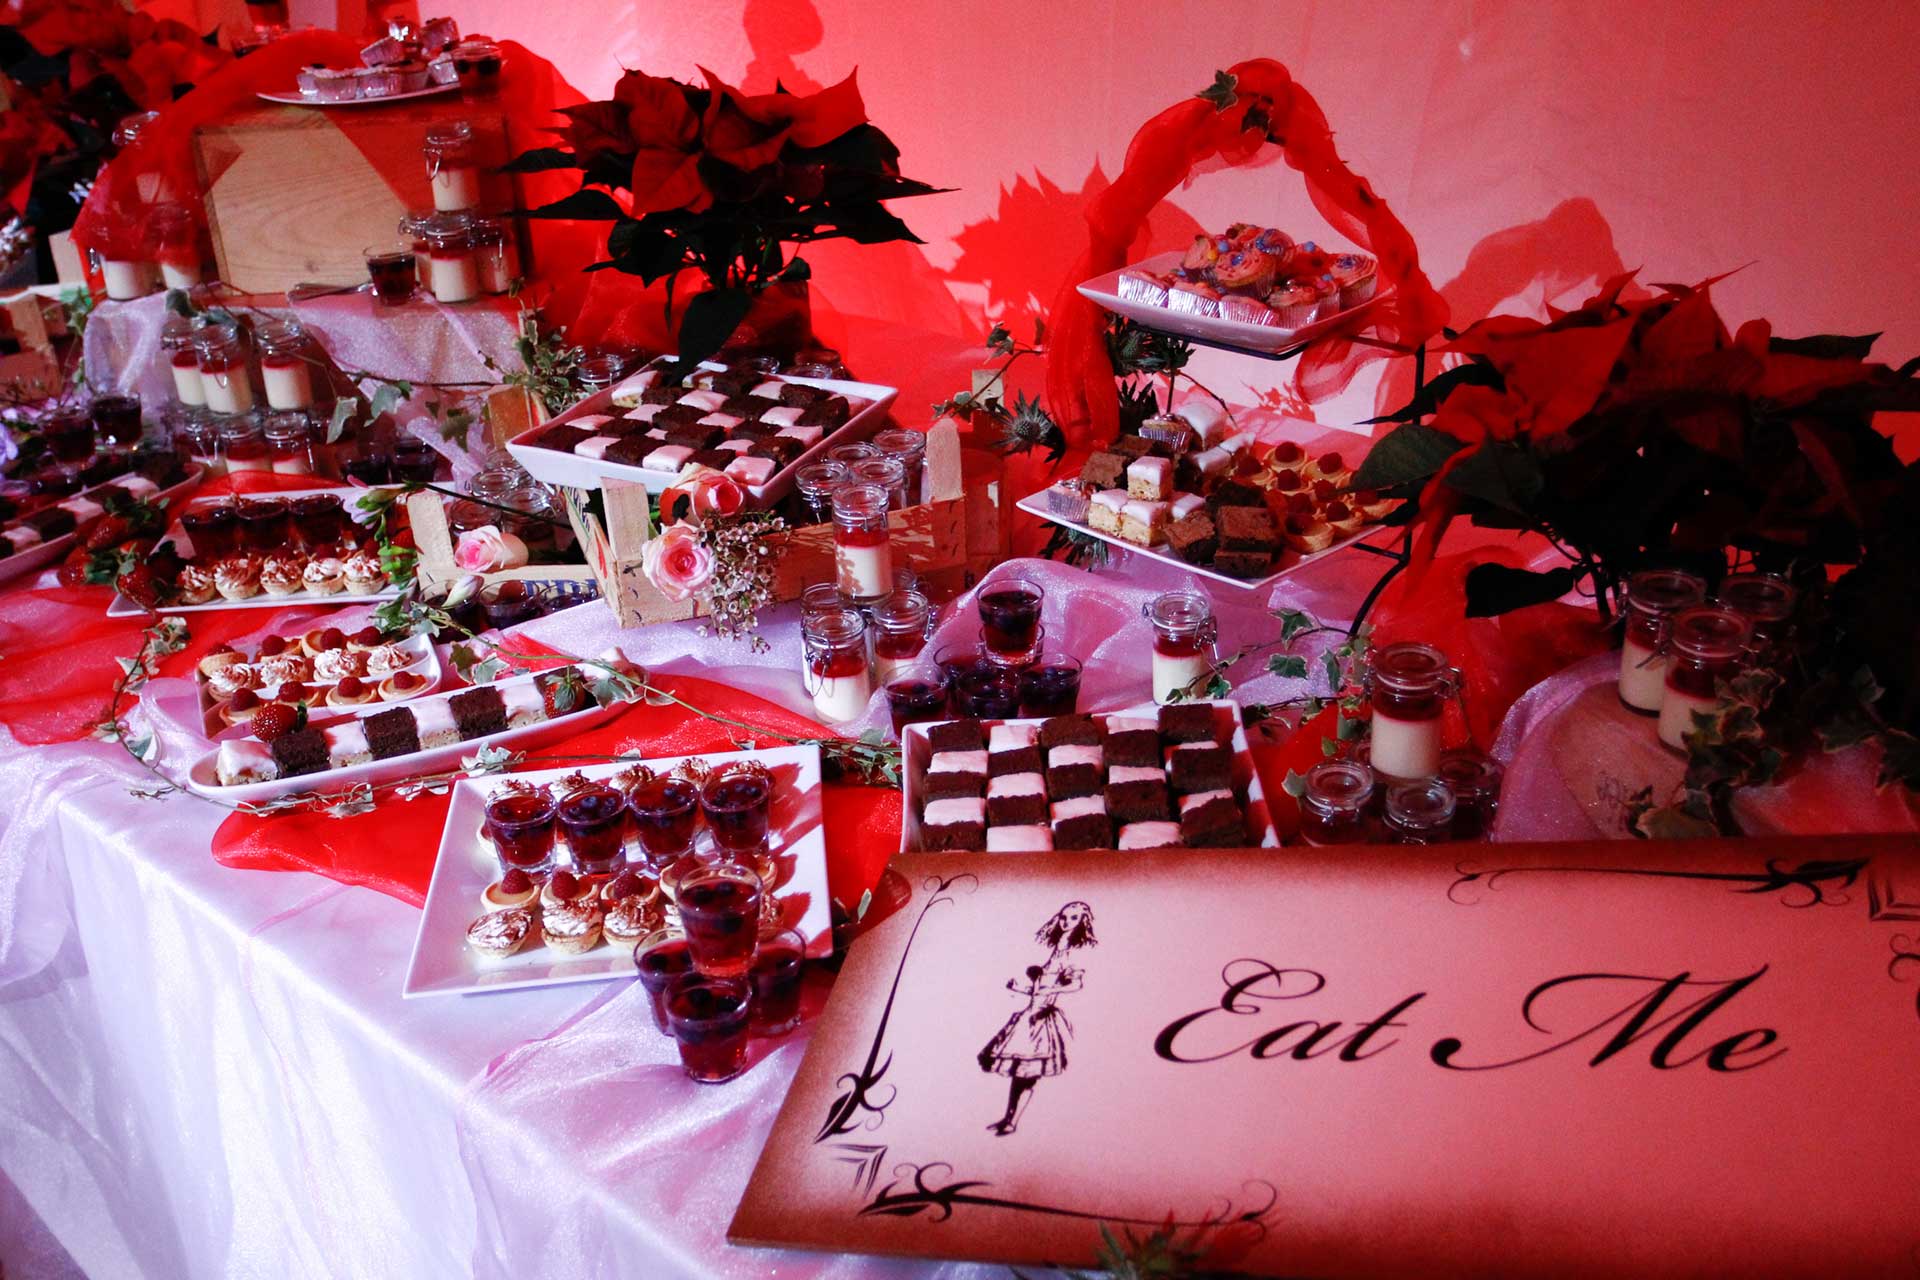 Alice in Wonderland themed catering for a party at Hurtwood Park